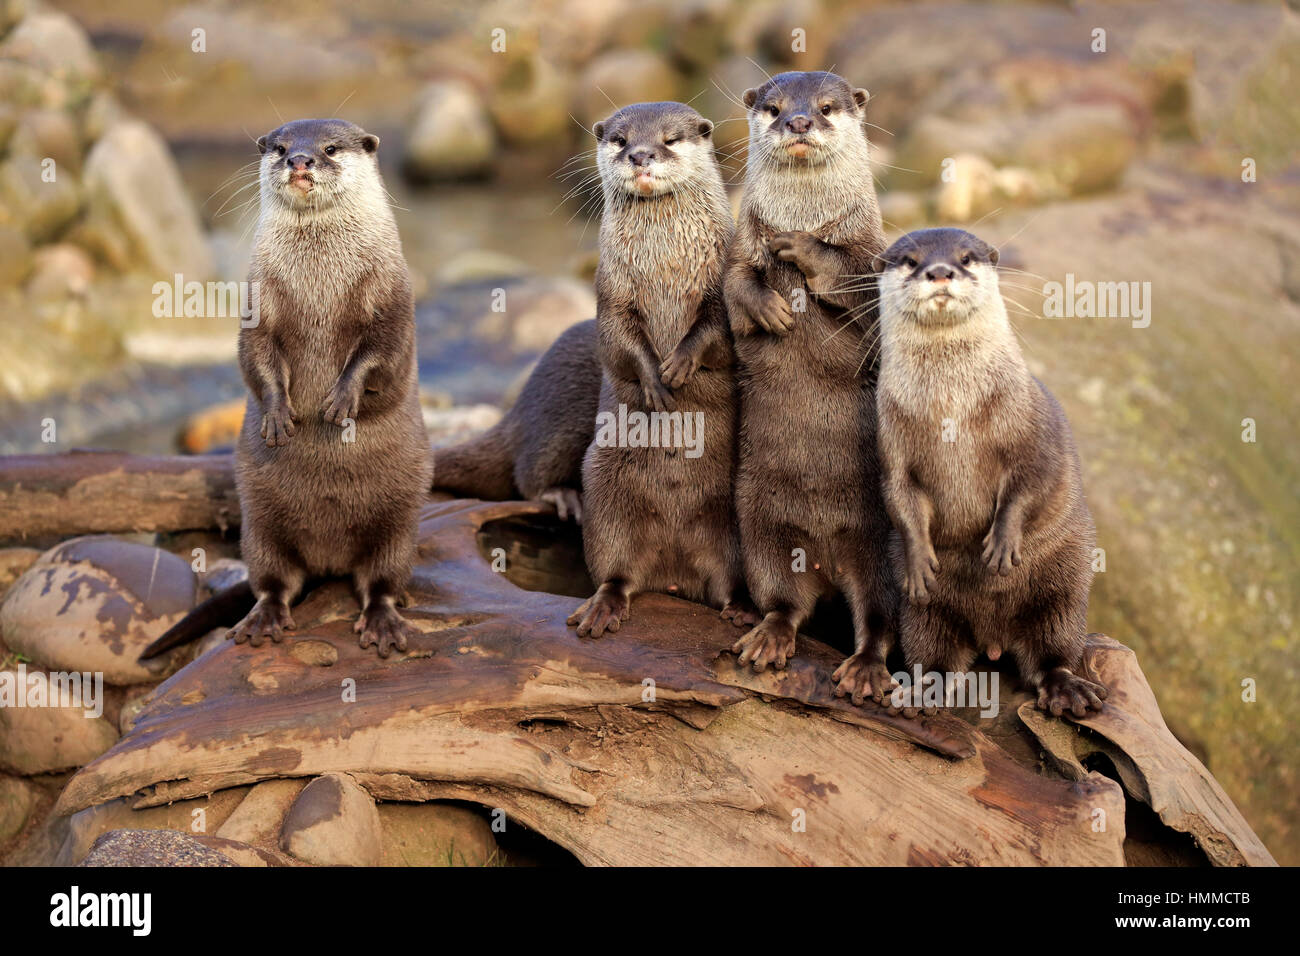 Oriental small-clawed Otter, (Amblonyx cinerea), group of adults standing upright, alert, Asia Stock Photo